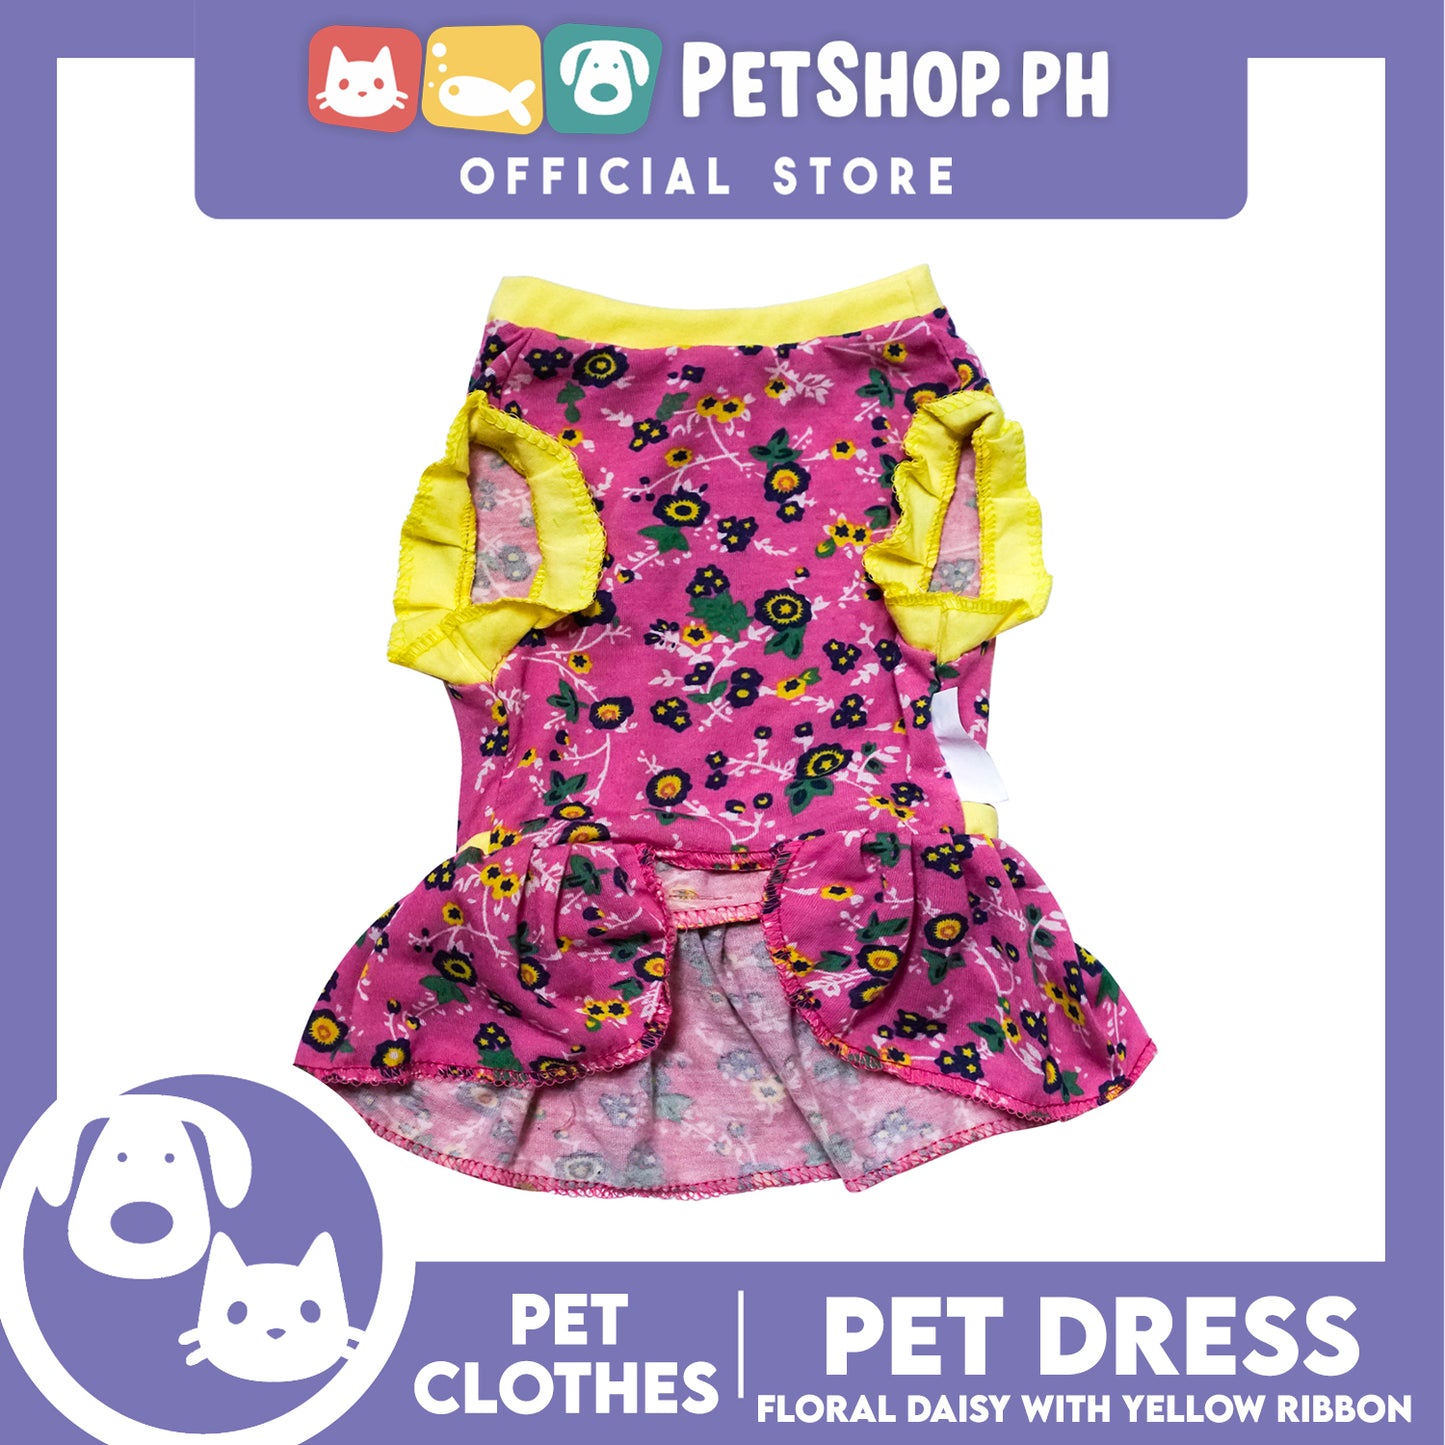 Pet Dress Floral Daisy with Yellow Ribbon (Small) Pet Dress Clothes Perfect for Dog